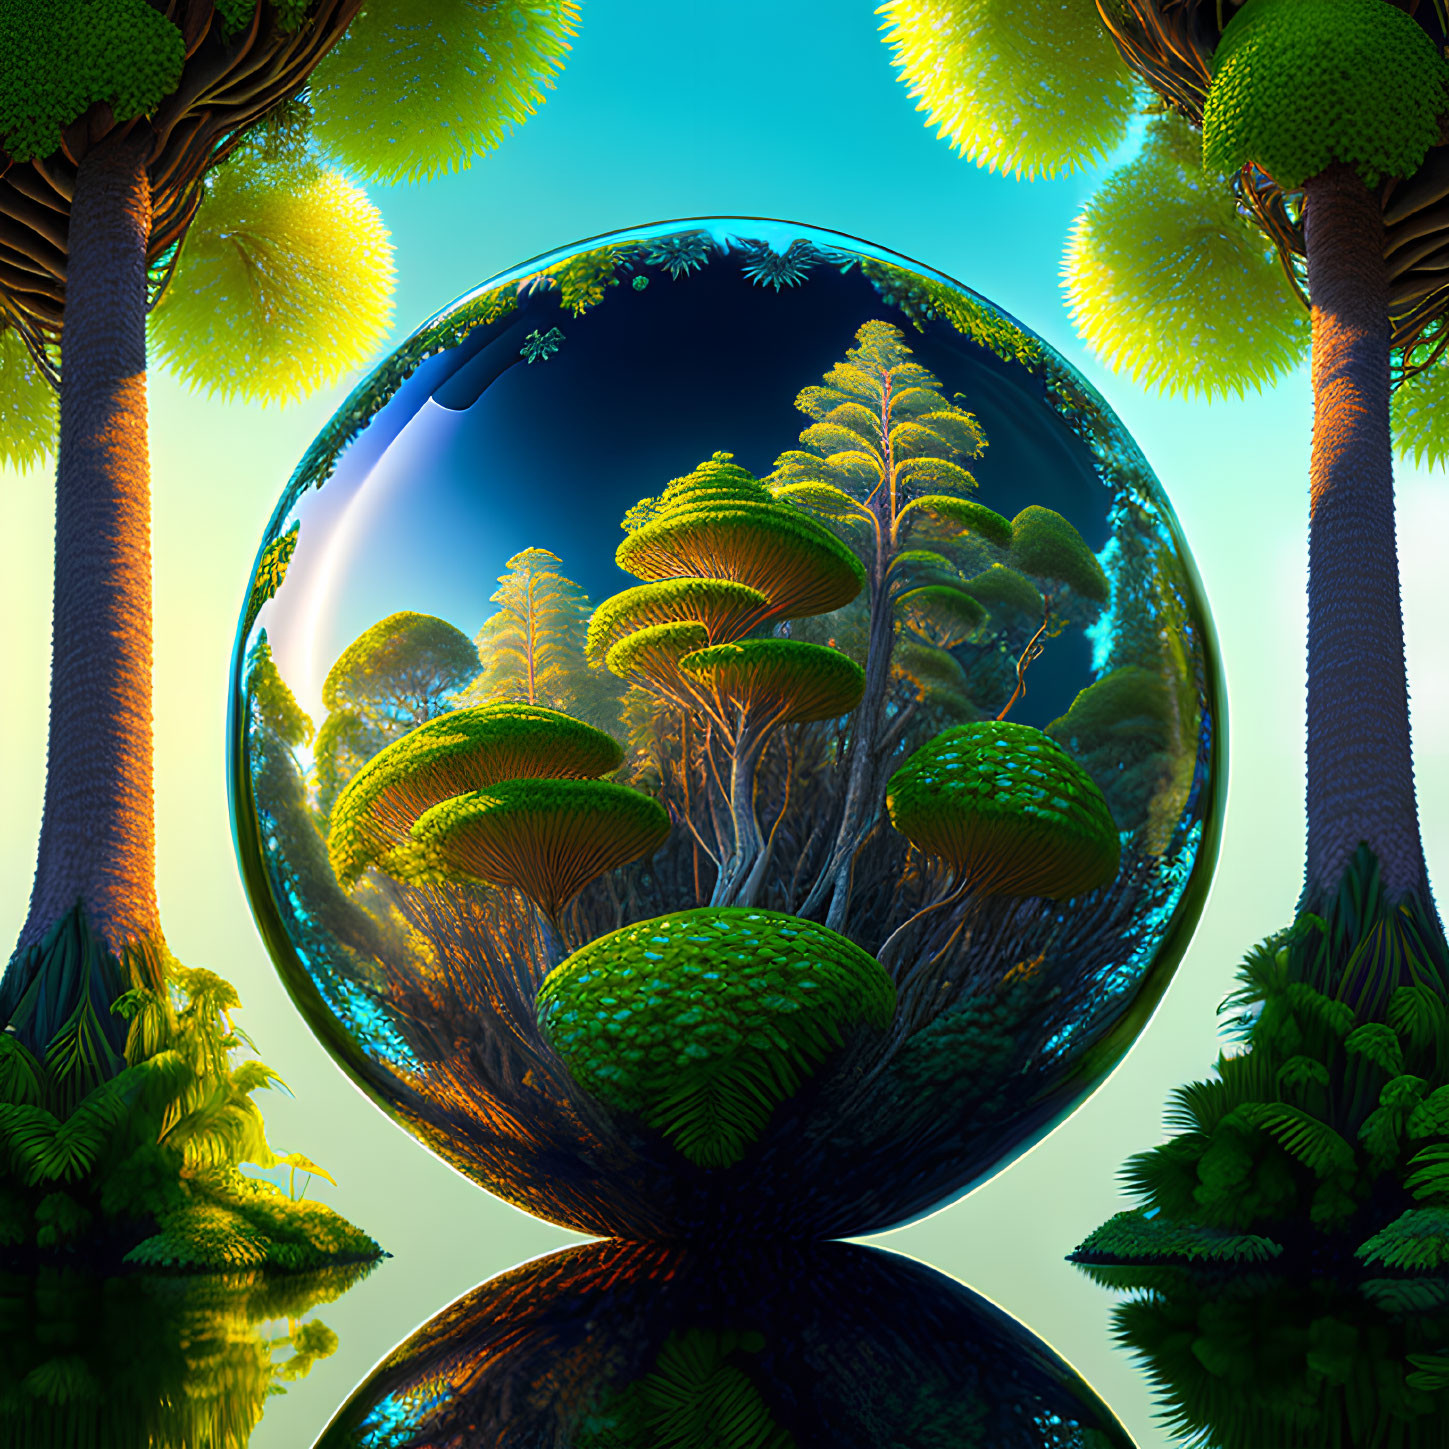 Surreal landscape with reflective sphere and inverted forest in vibrant green setting